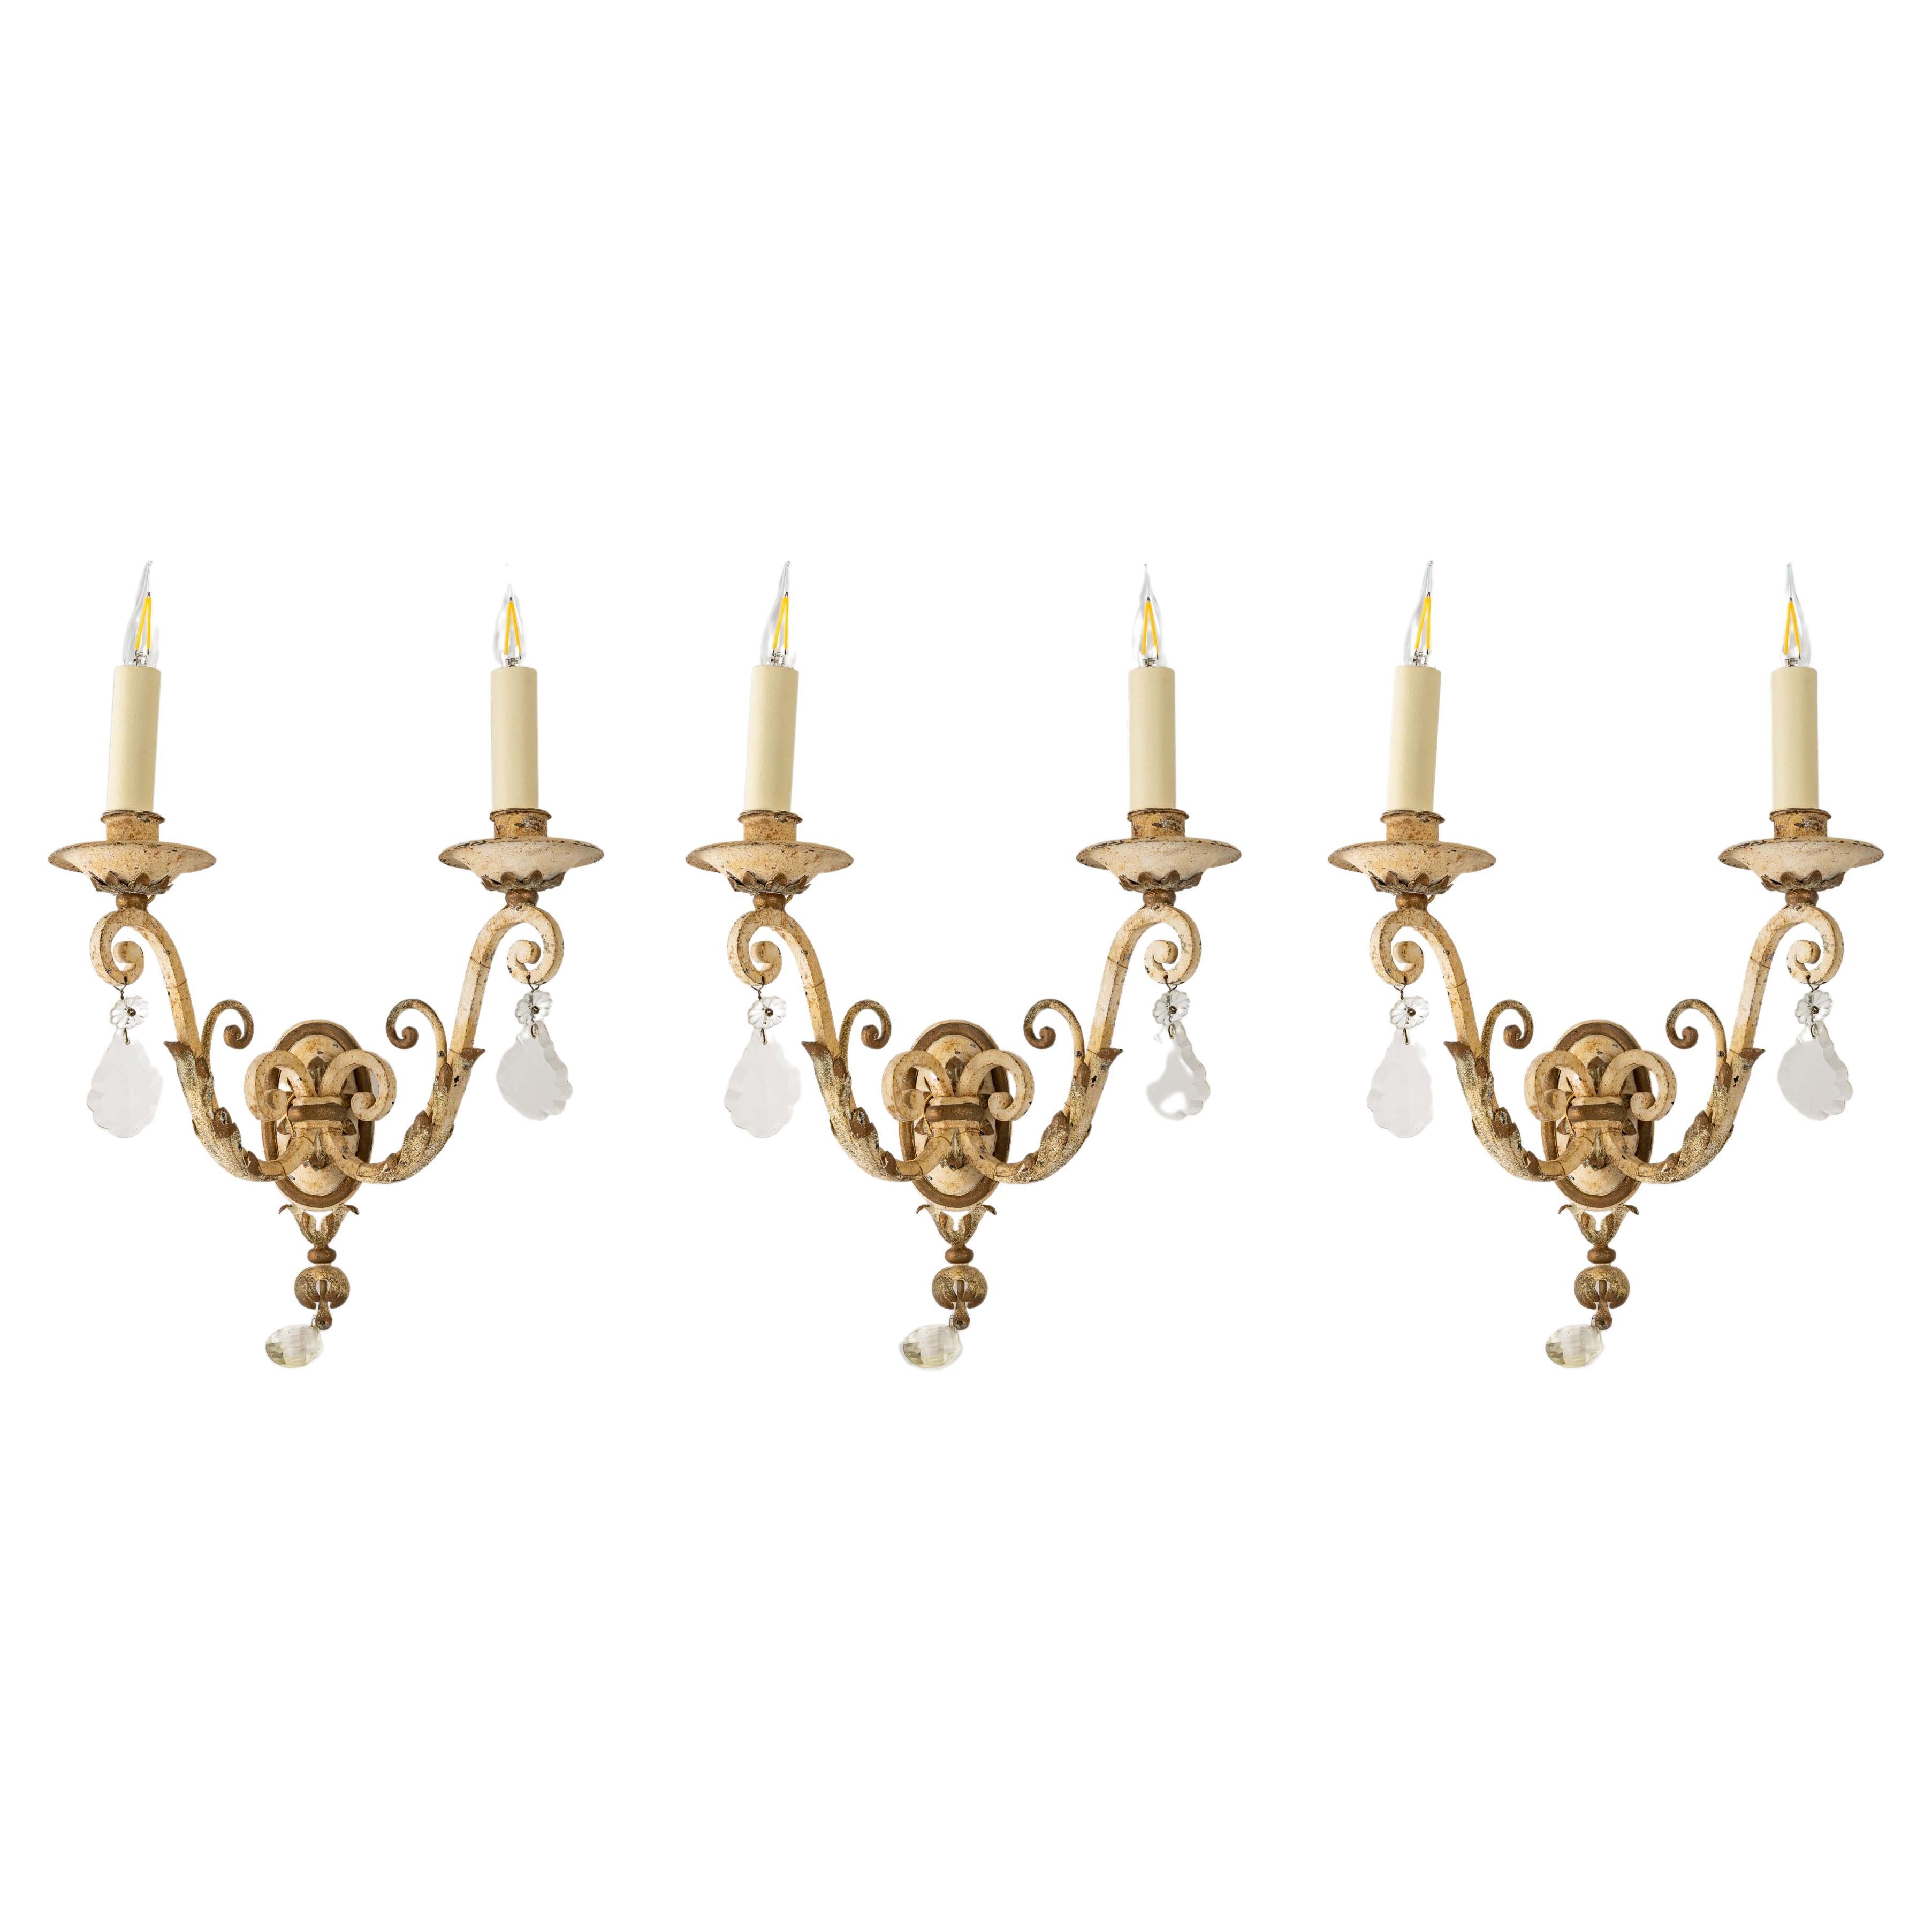 Suite of Three Wrought Iron Sconces, Early 20th Century For Sale